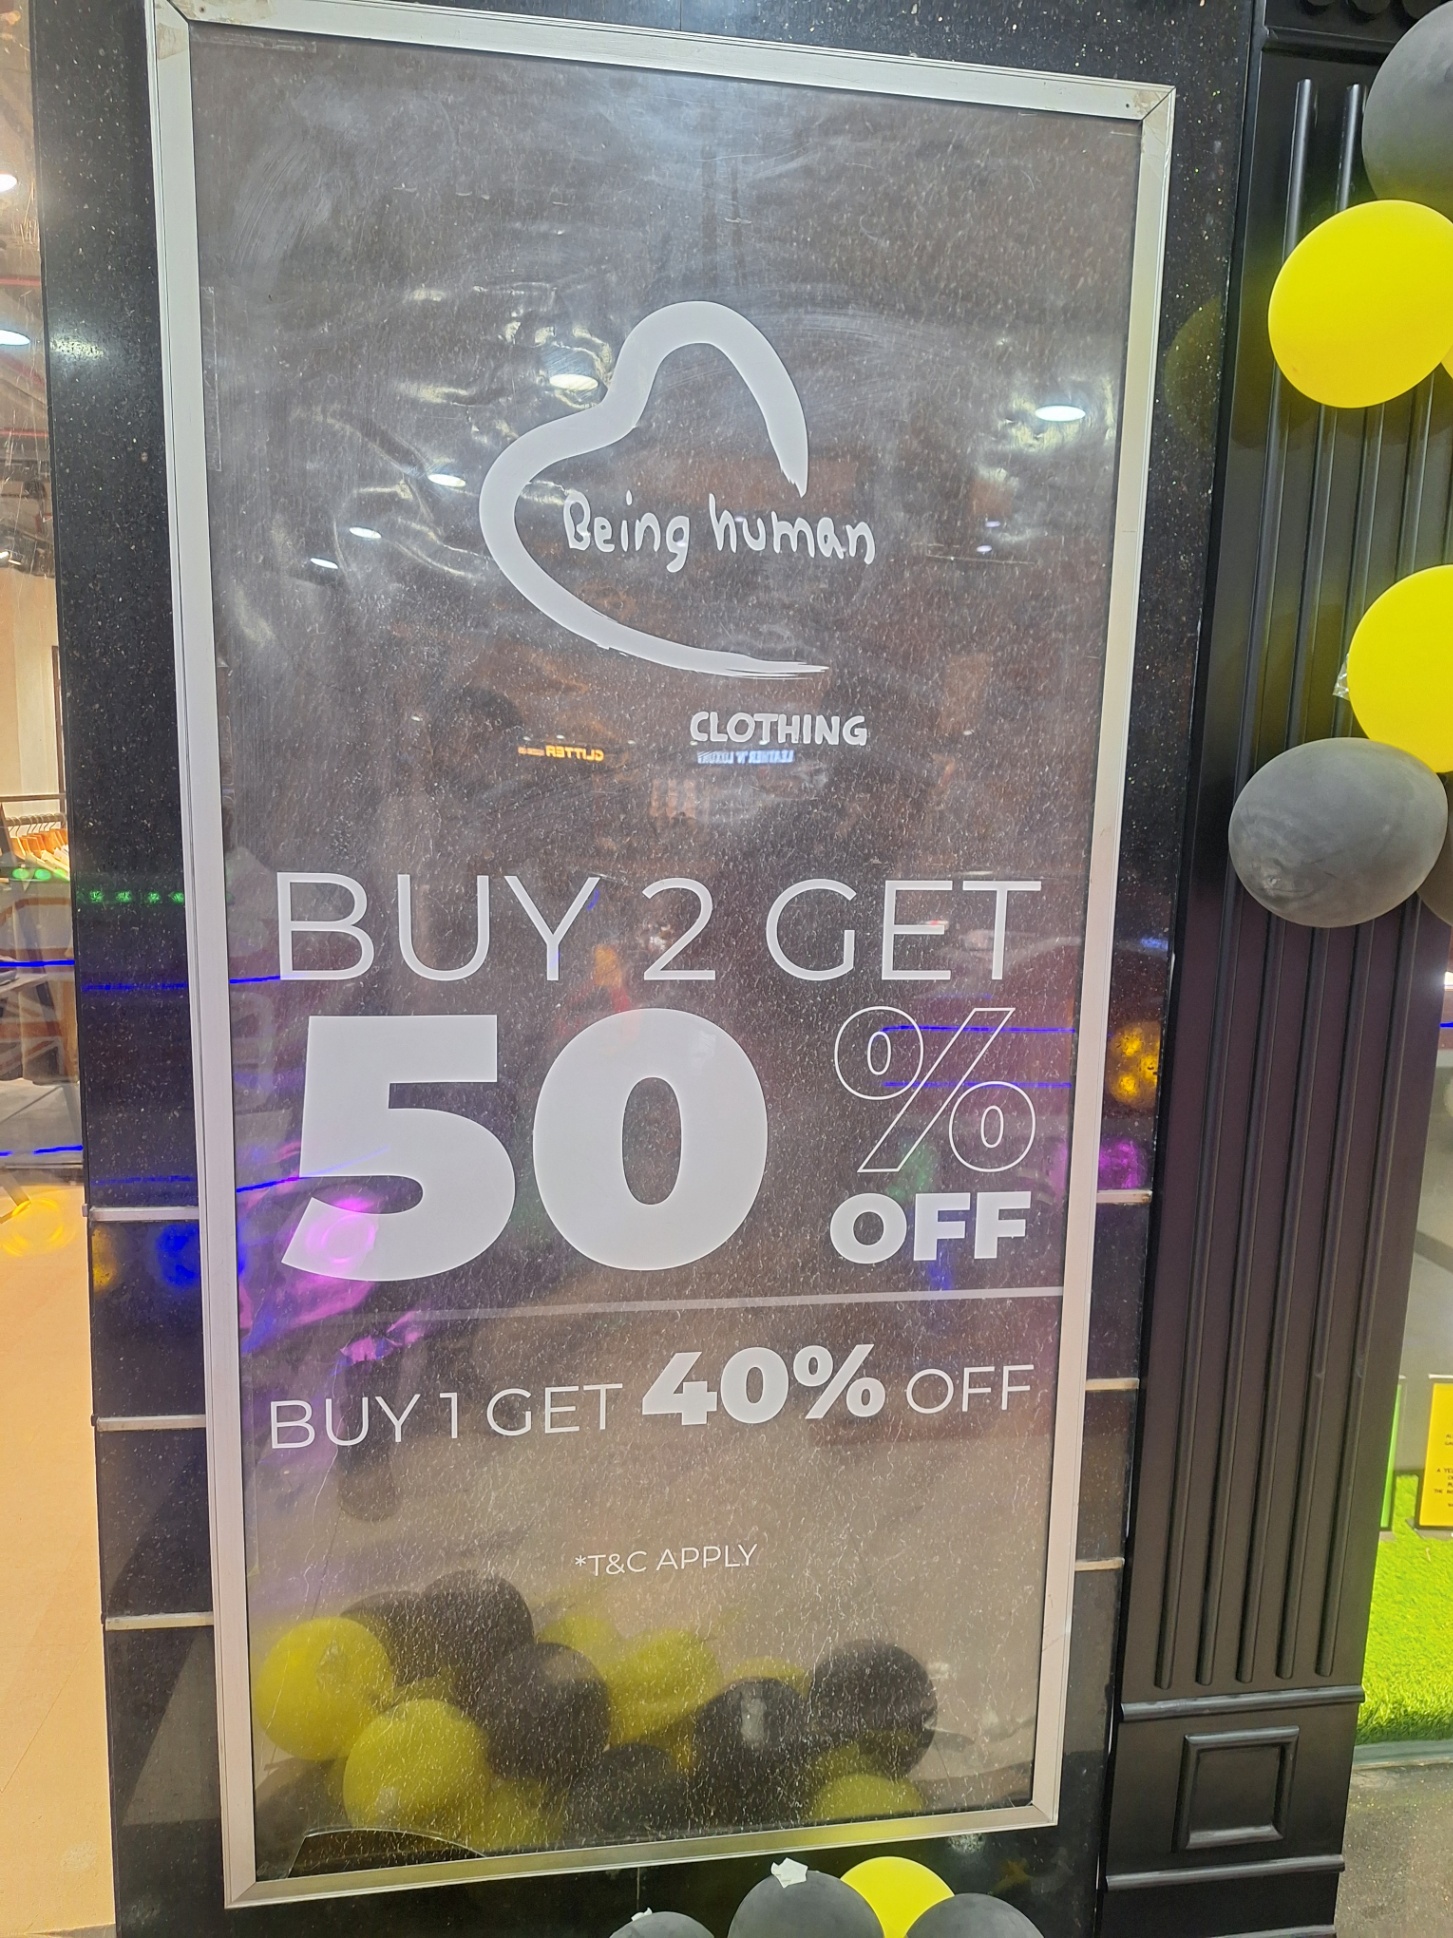 Upto 50% Off Deal @Being Human, Ashima Mall , Bhopal